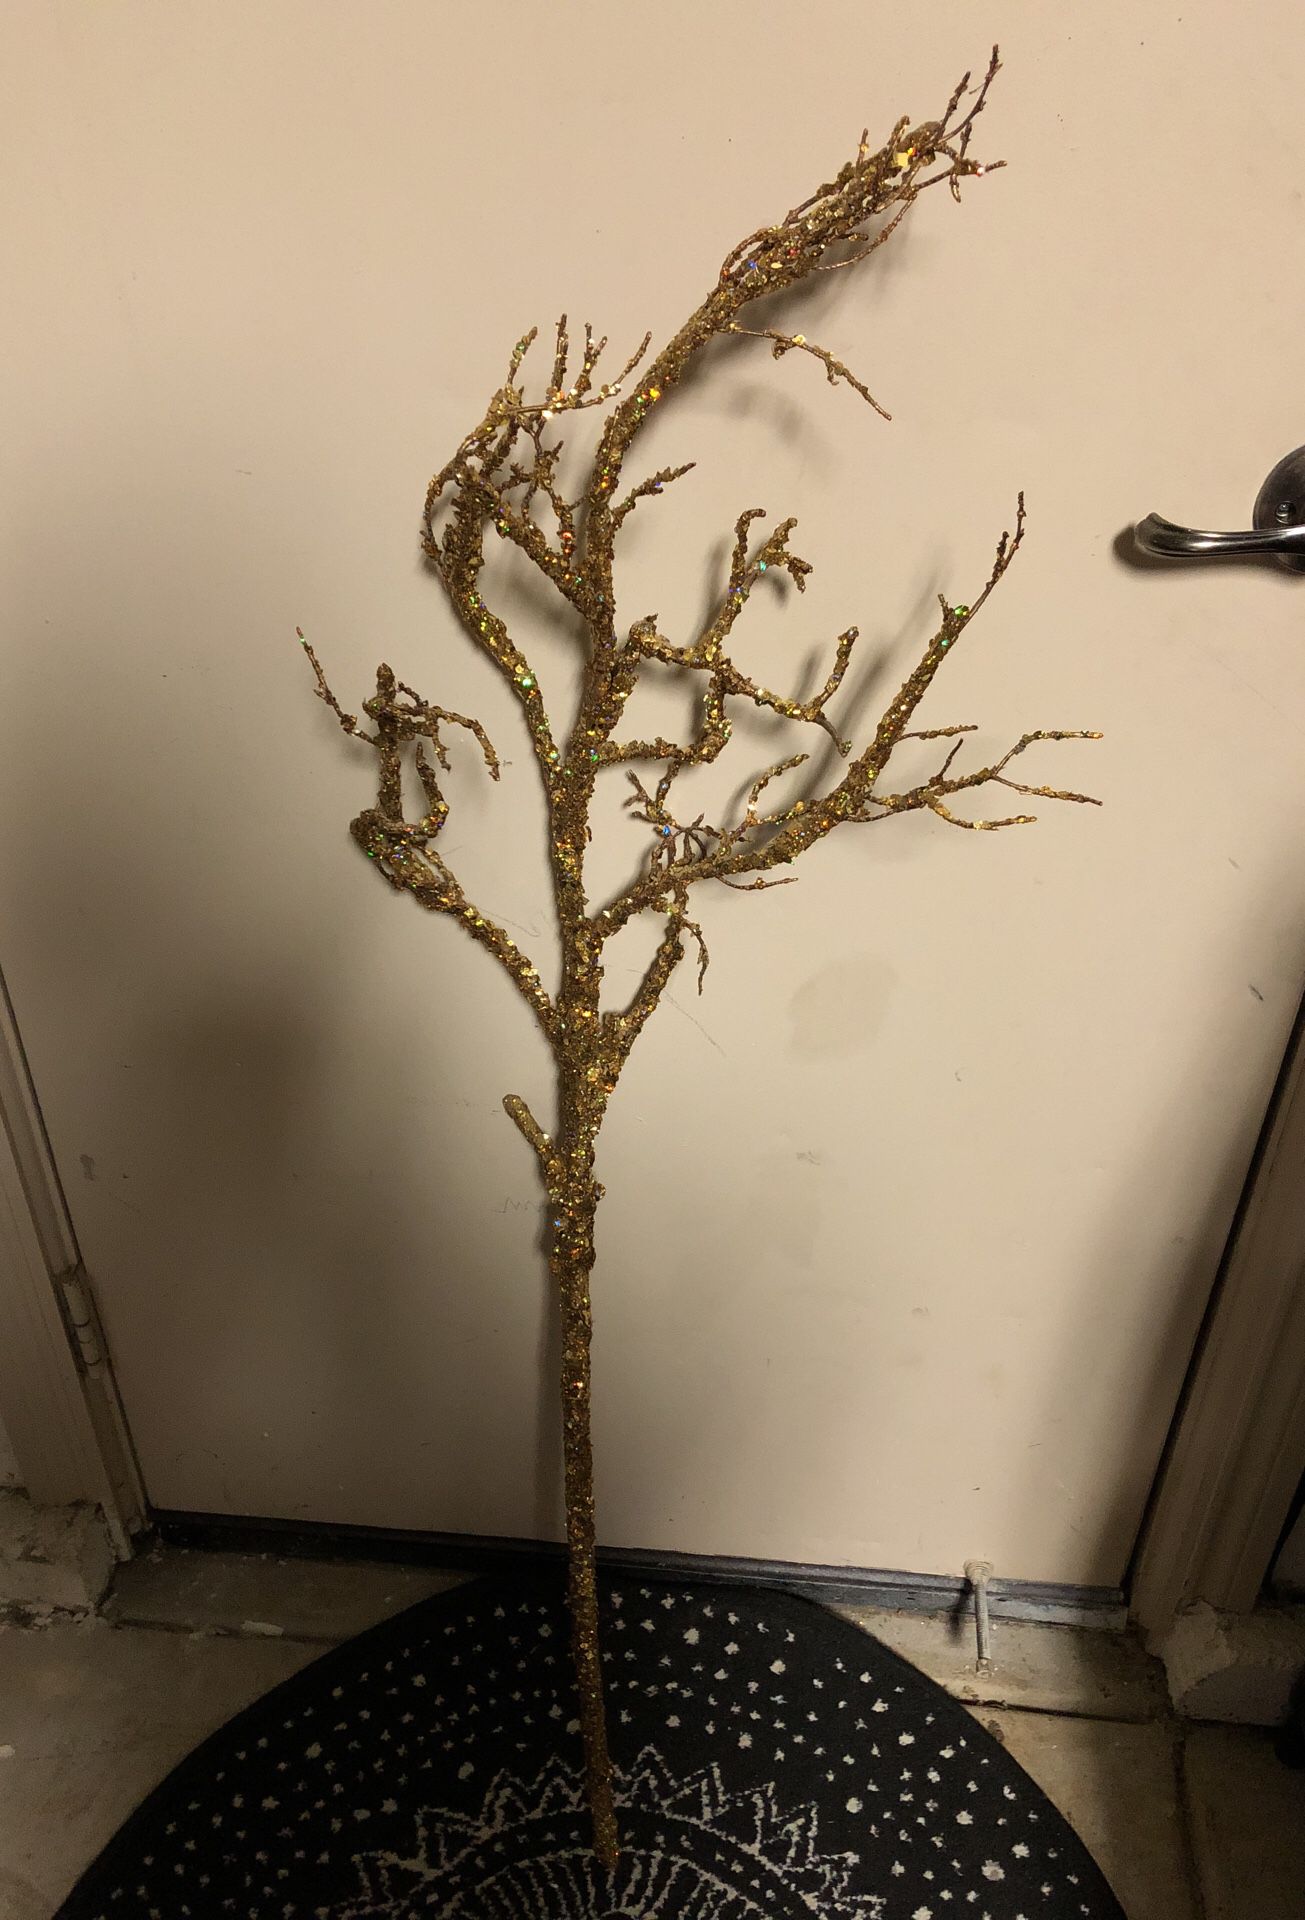 Gold stems for decoration $10 each